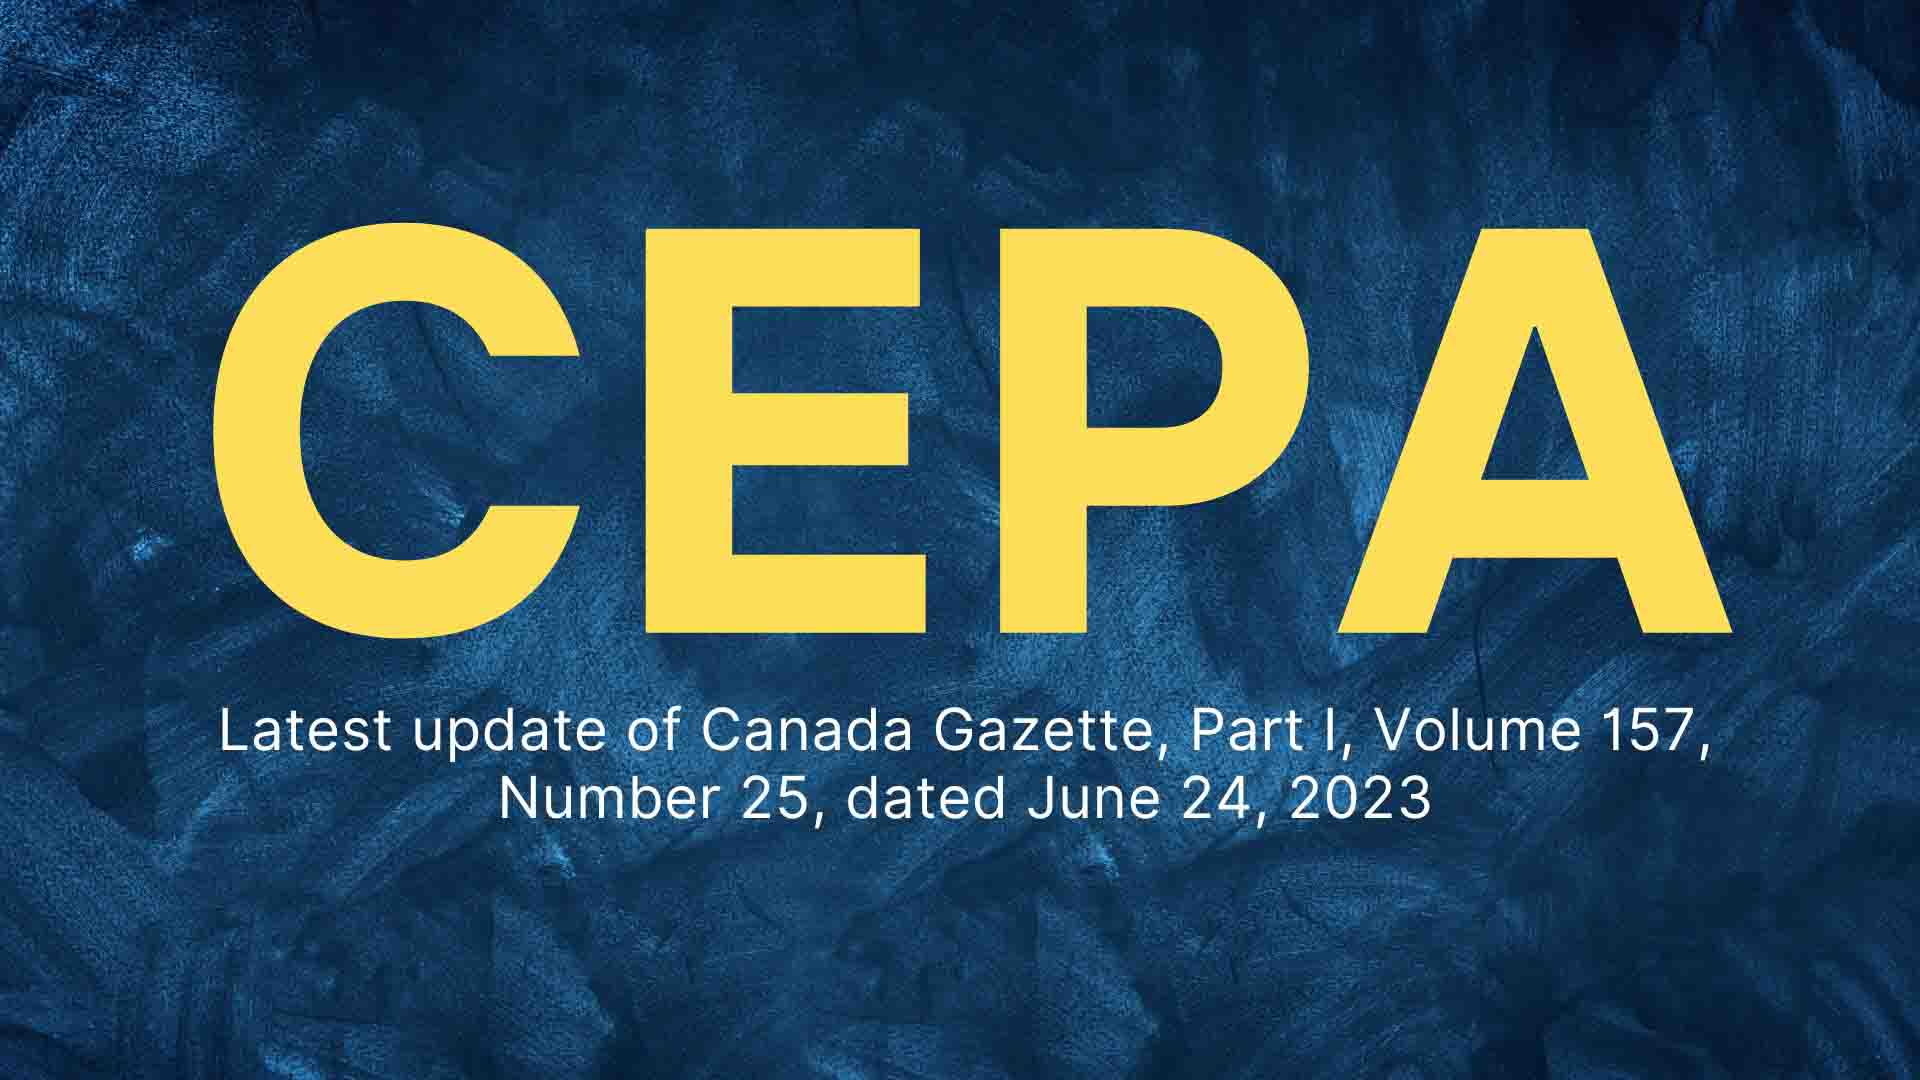 CEPA's Two Latest Updates and Regulatory Actions June 2023